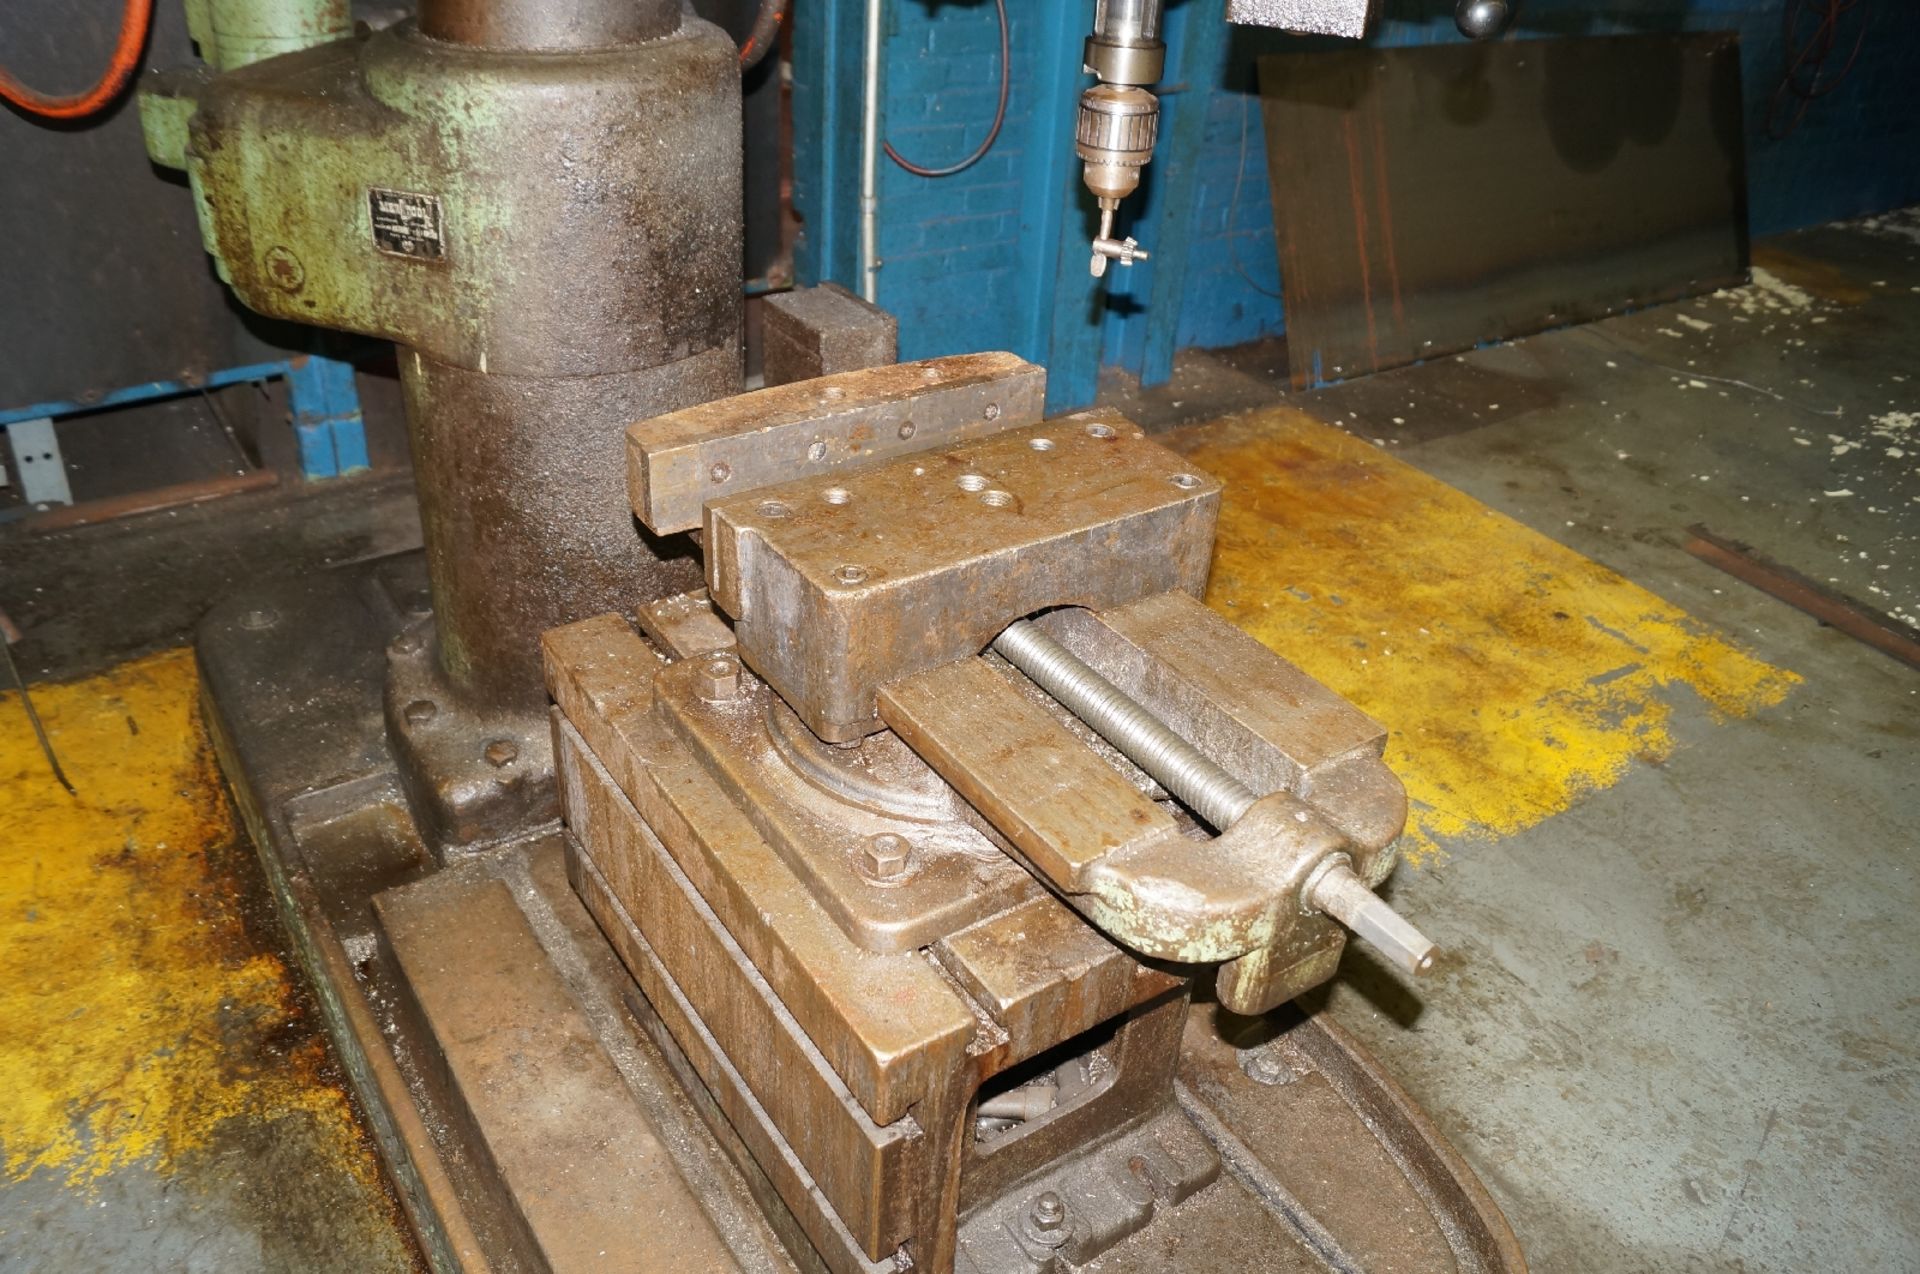 American Hole Wizard Radial Arm Drill ; 18" x 24" x 12" Table, with 16-1/4" Machine Vise, BT - Image 3 of 3